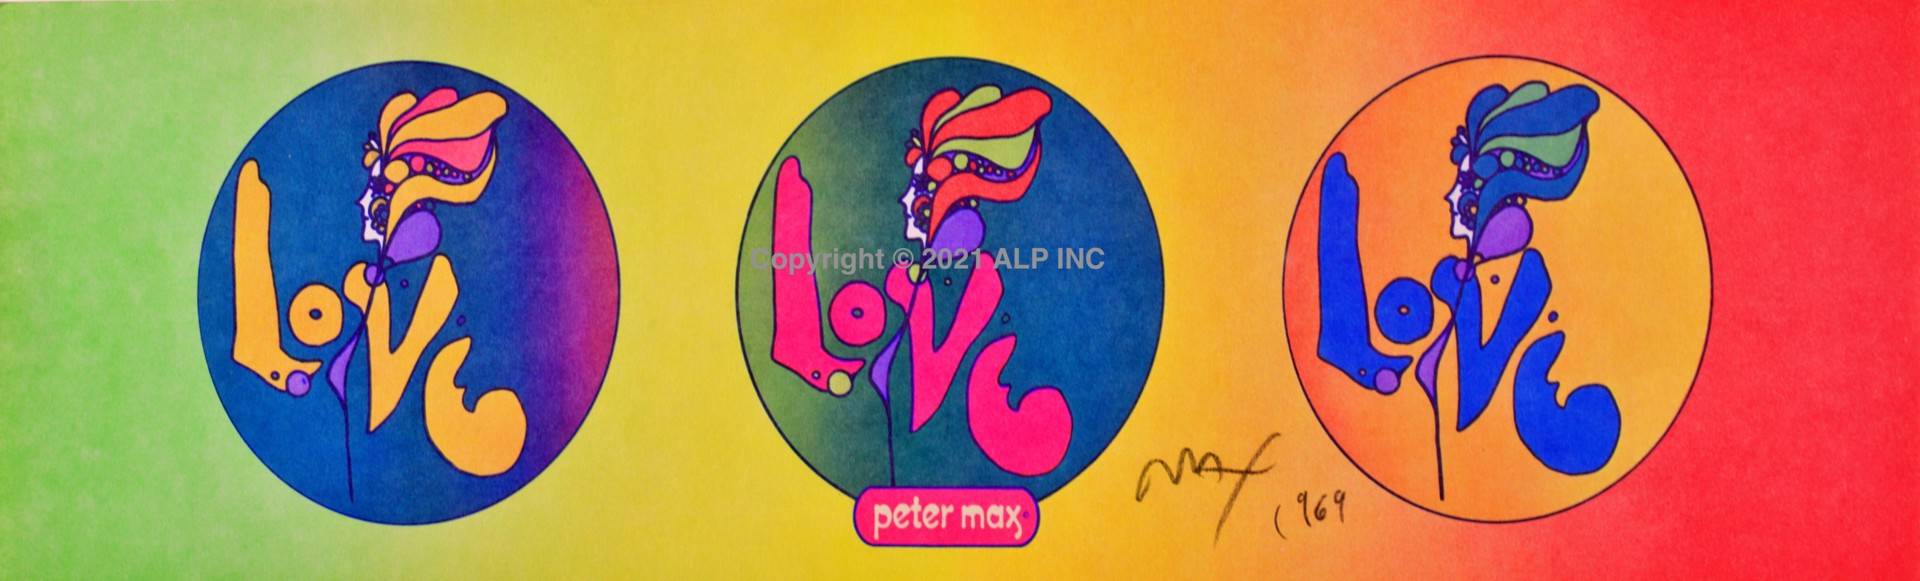 Love - Mini Long by Peter Max